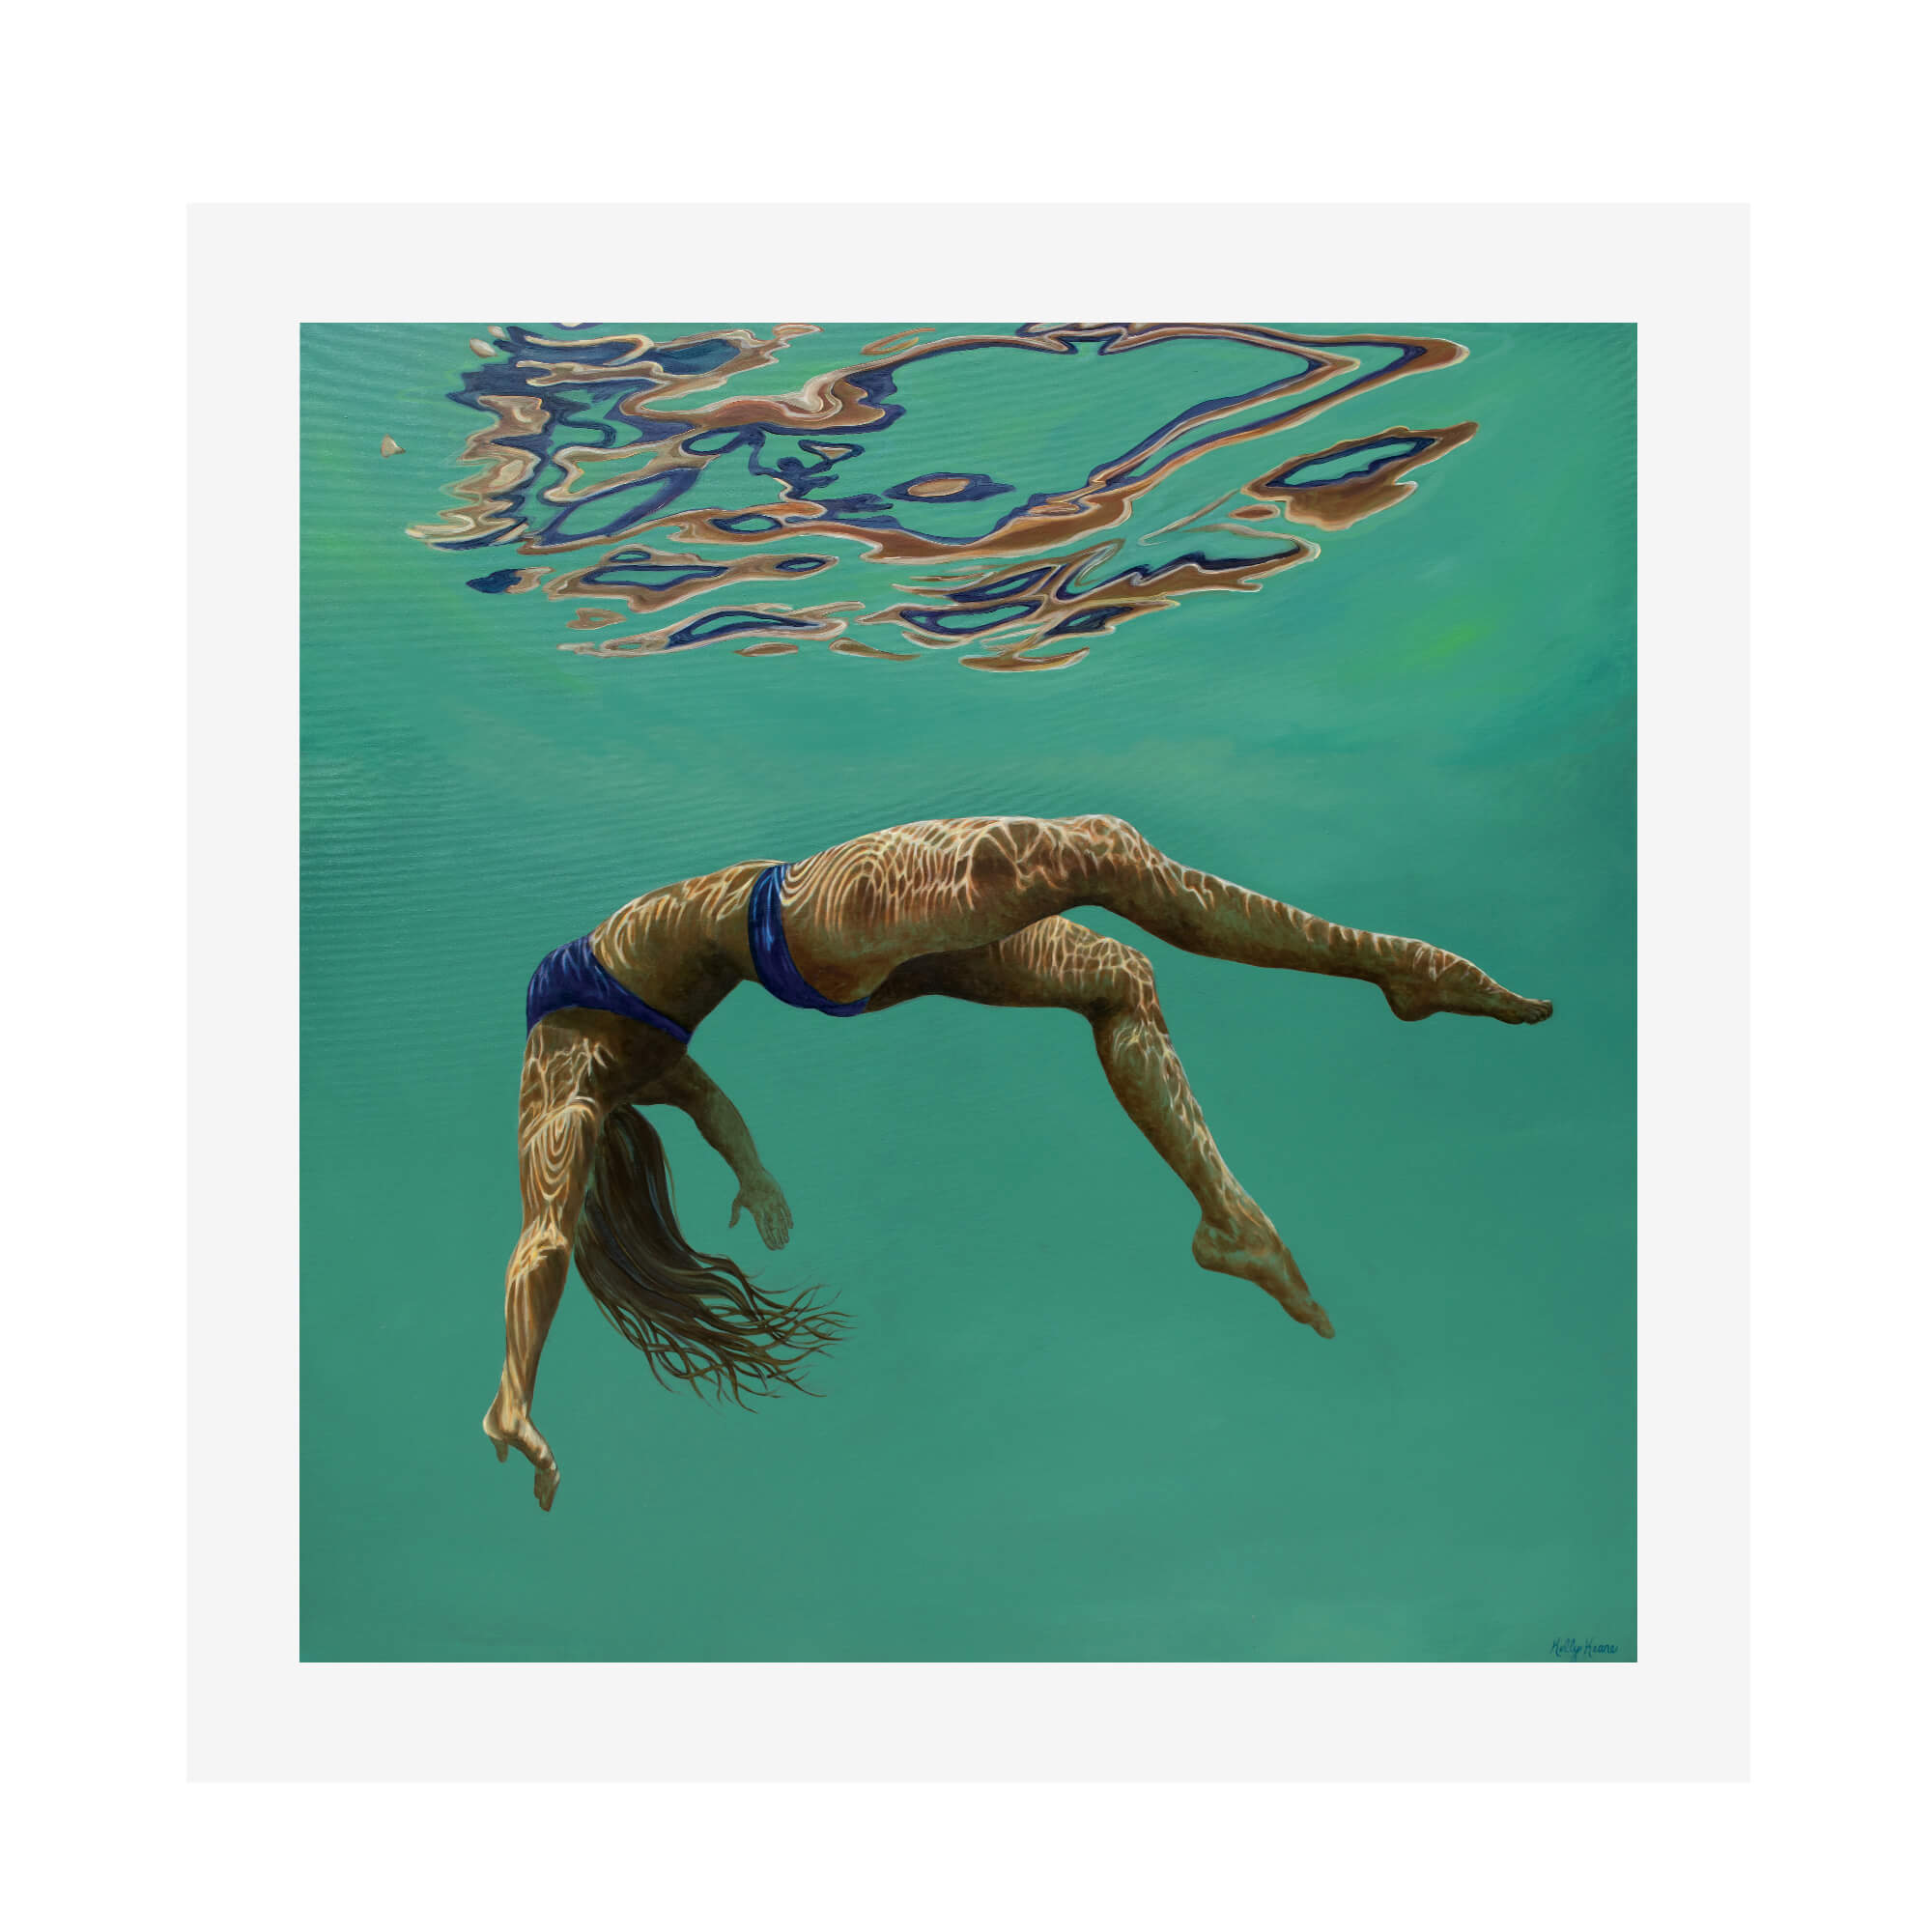 Paper art print of a woman swimming peacefully by Hawaii artist Kelly Keane